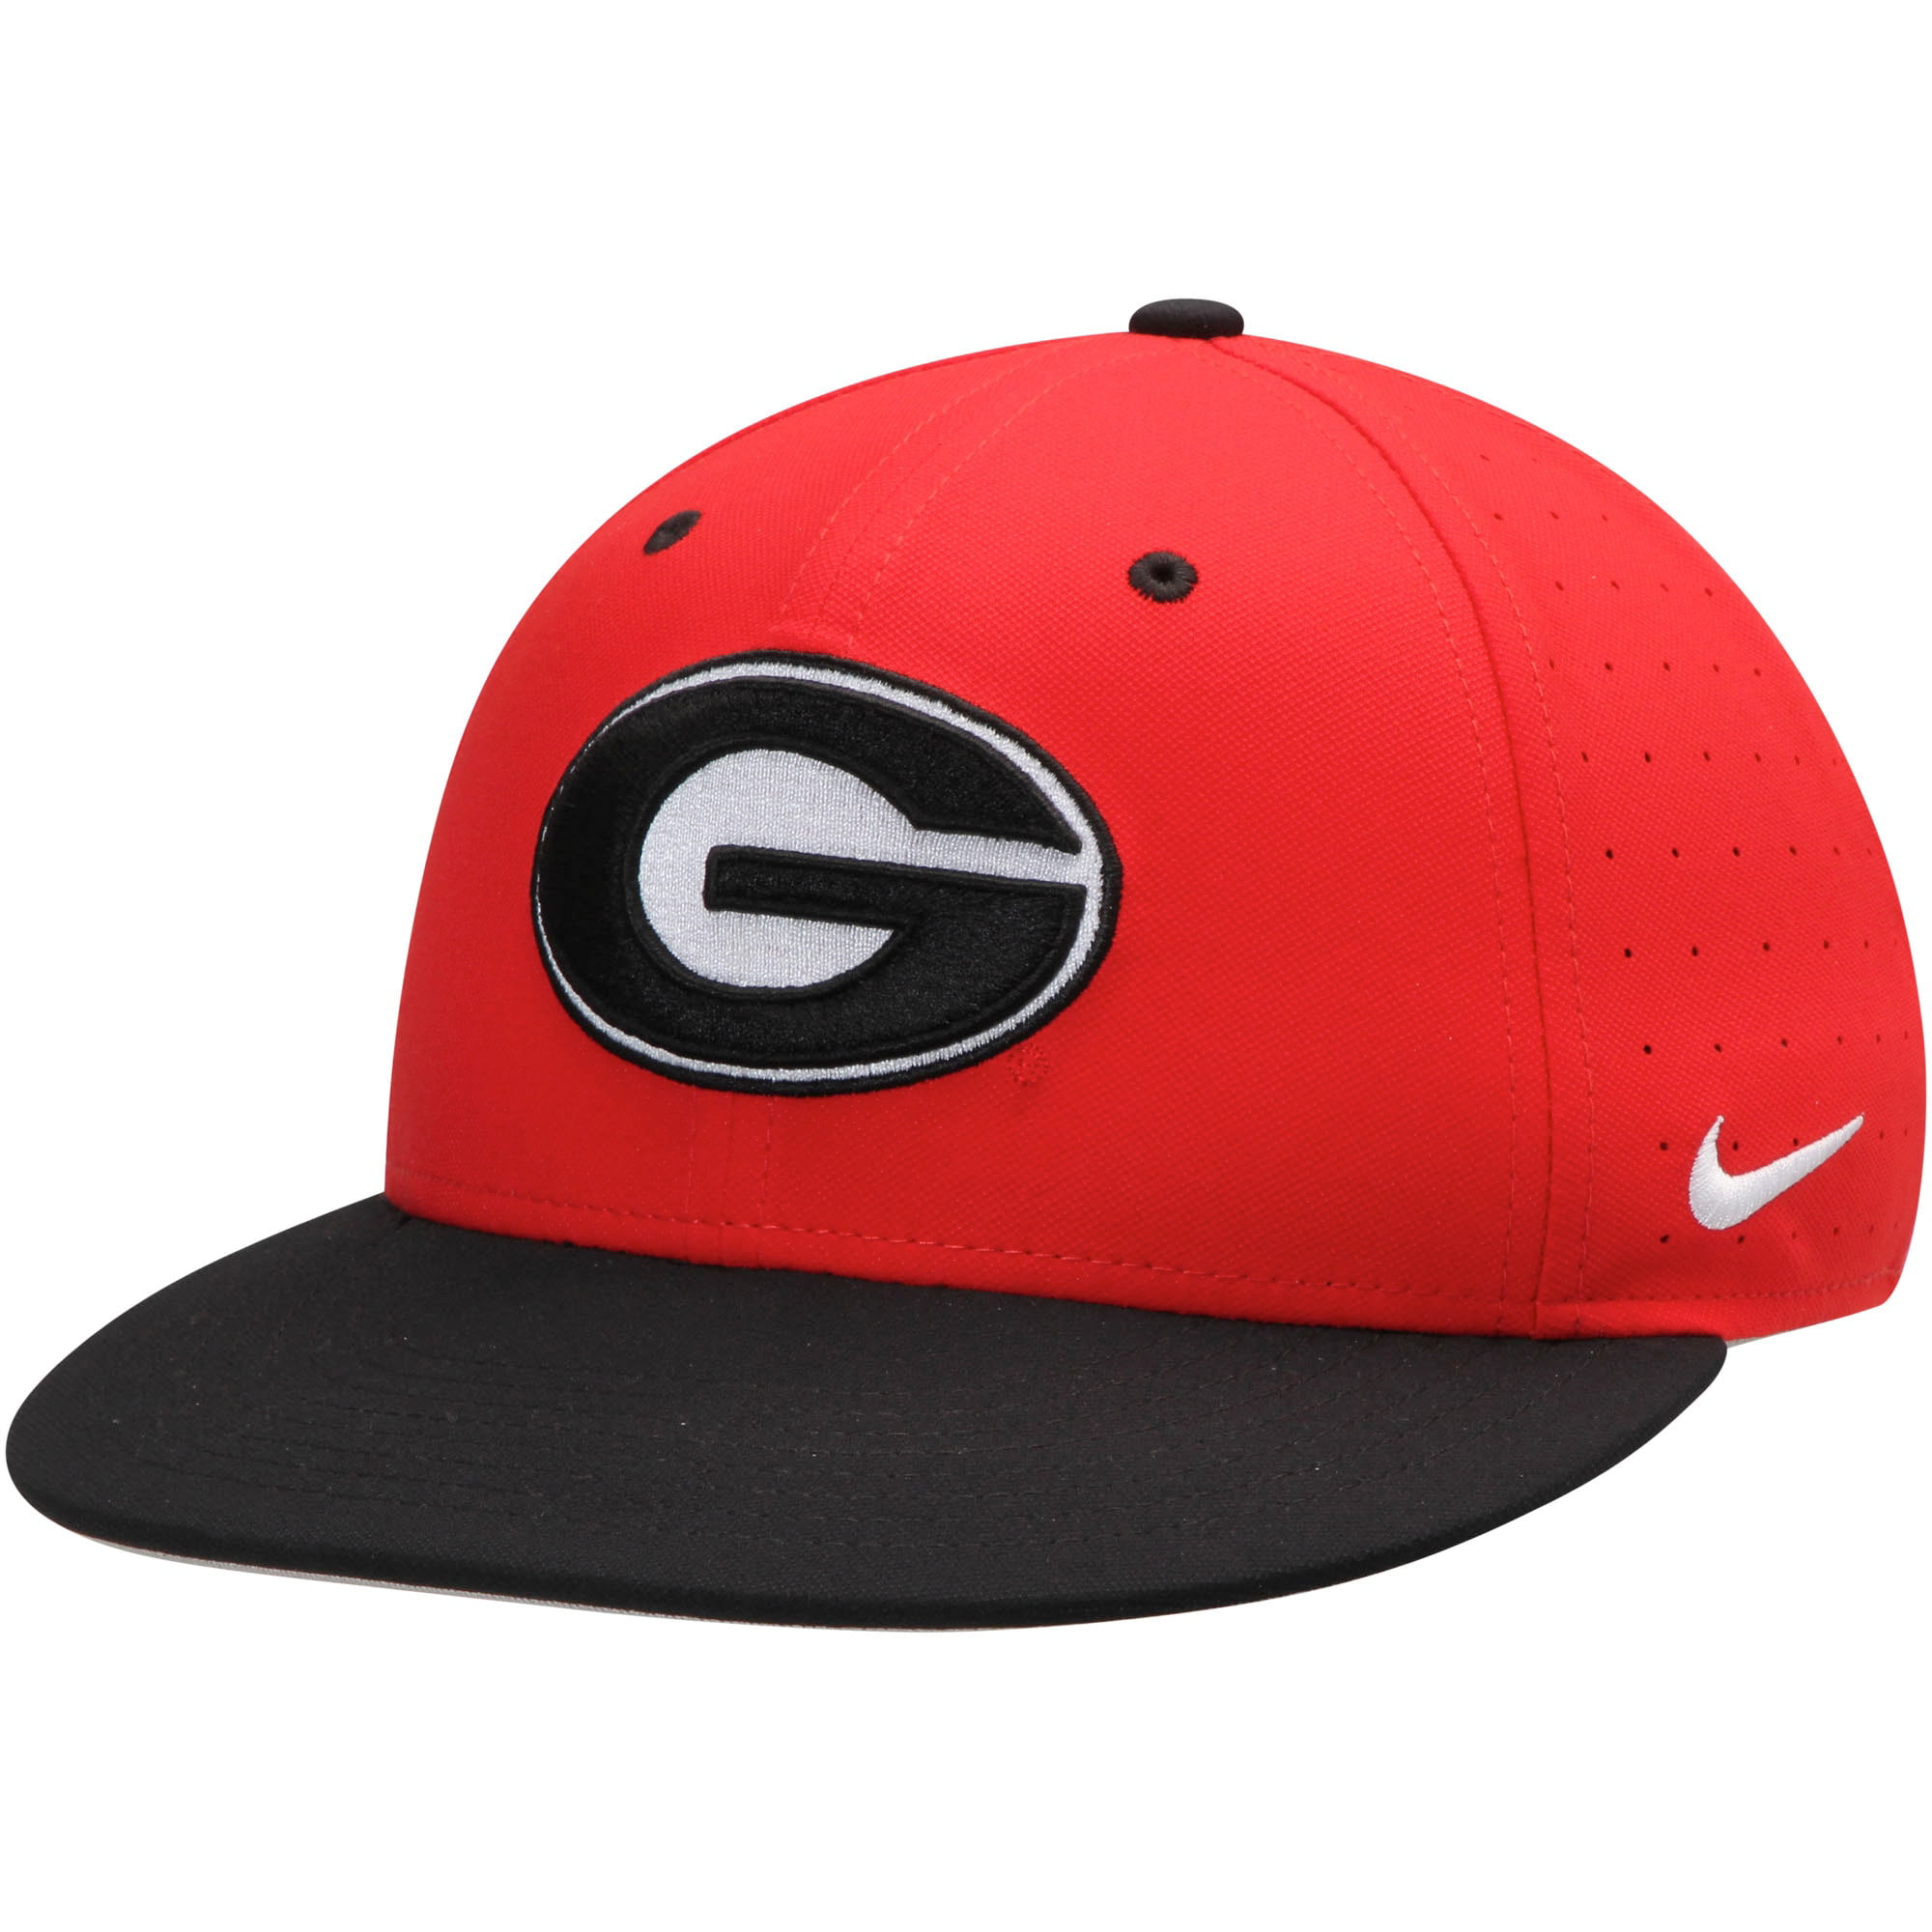 Authentic NCAA Georgia Bulldogs Baseball Cap Hat Adult Mesh Stretch Fit NEW/TAGS 